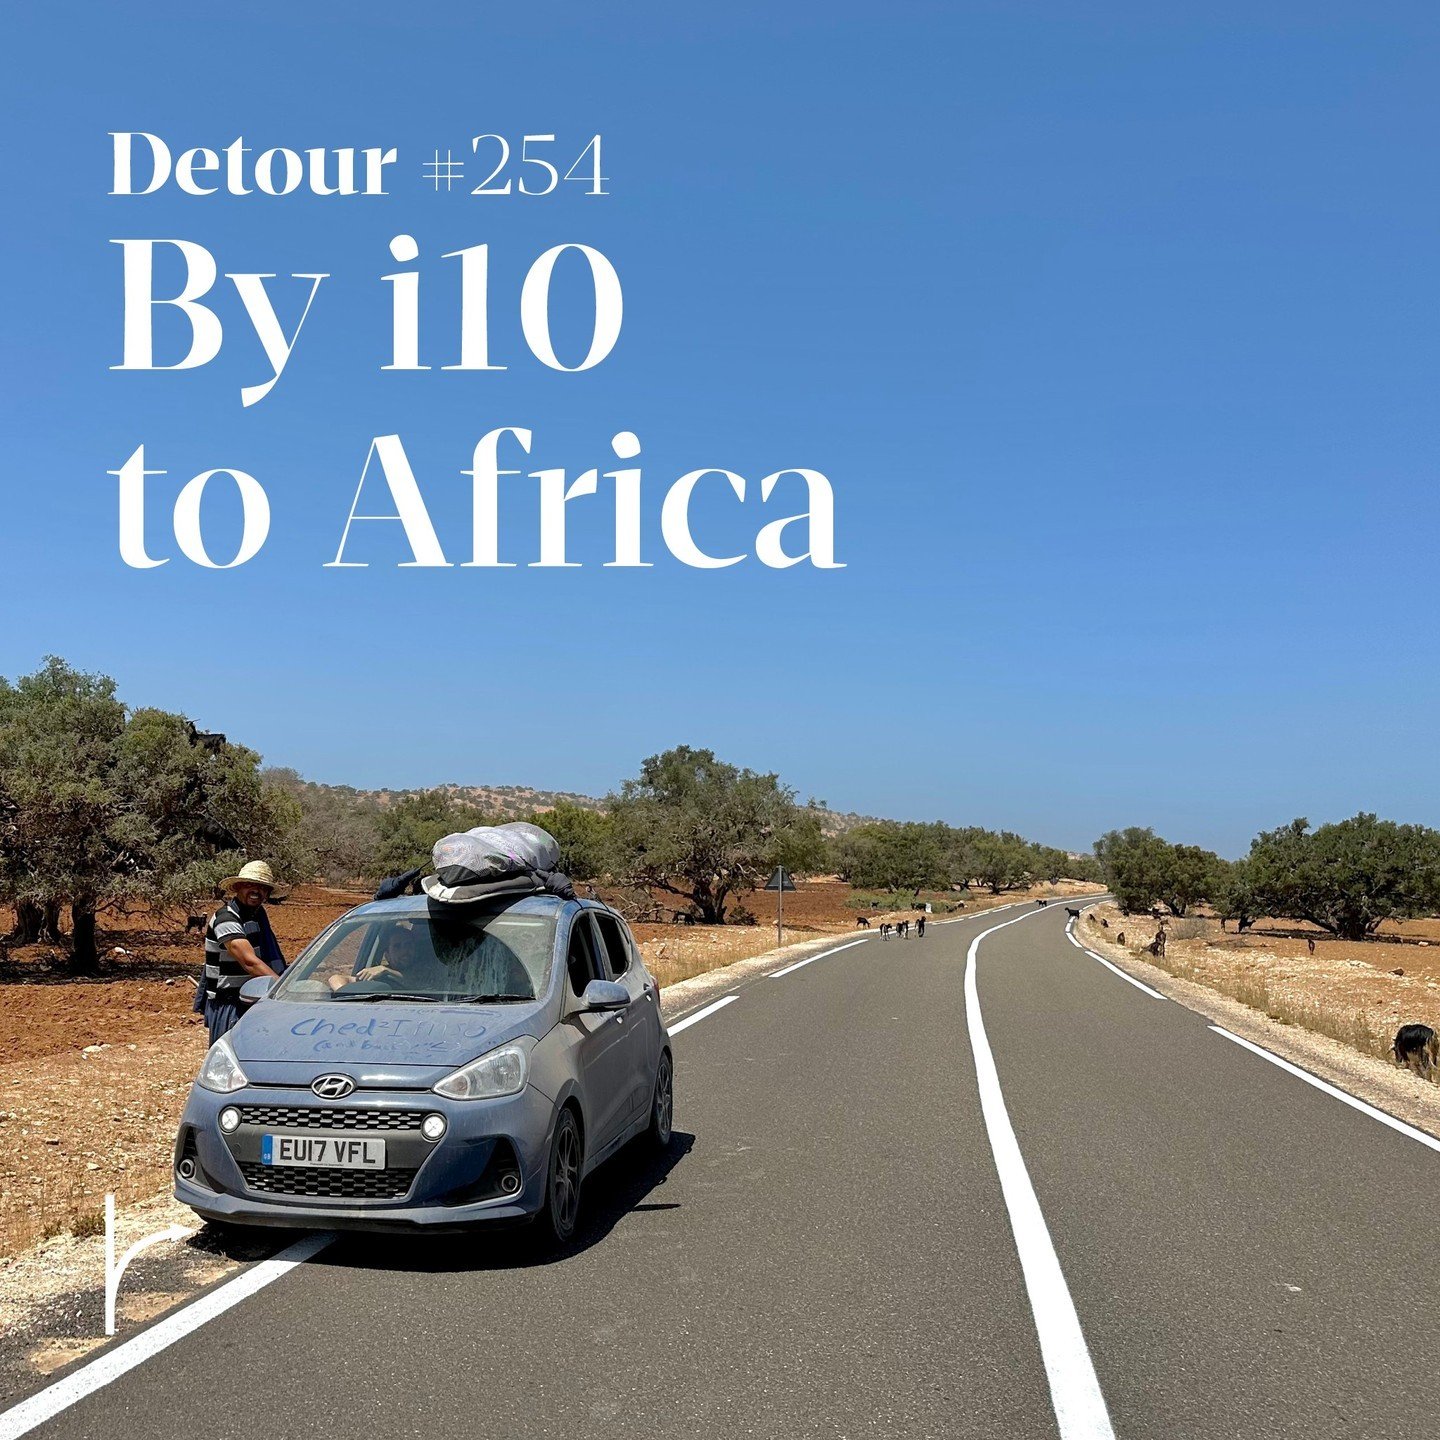 When Griff Gough-Walters and his chums decided to drive from London to Africa and back they didn't build a specialist adventure vehicle. Instead they simply jumped into a humble Hyundai hatchback and headed off.⁠
⁠
&quot;It was a plucky morsel of met